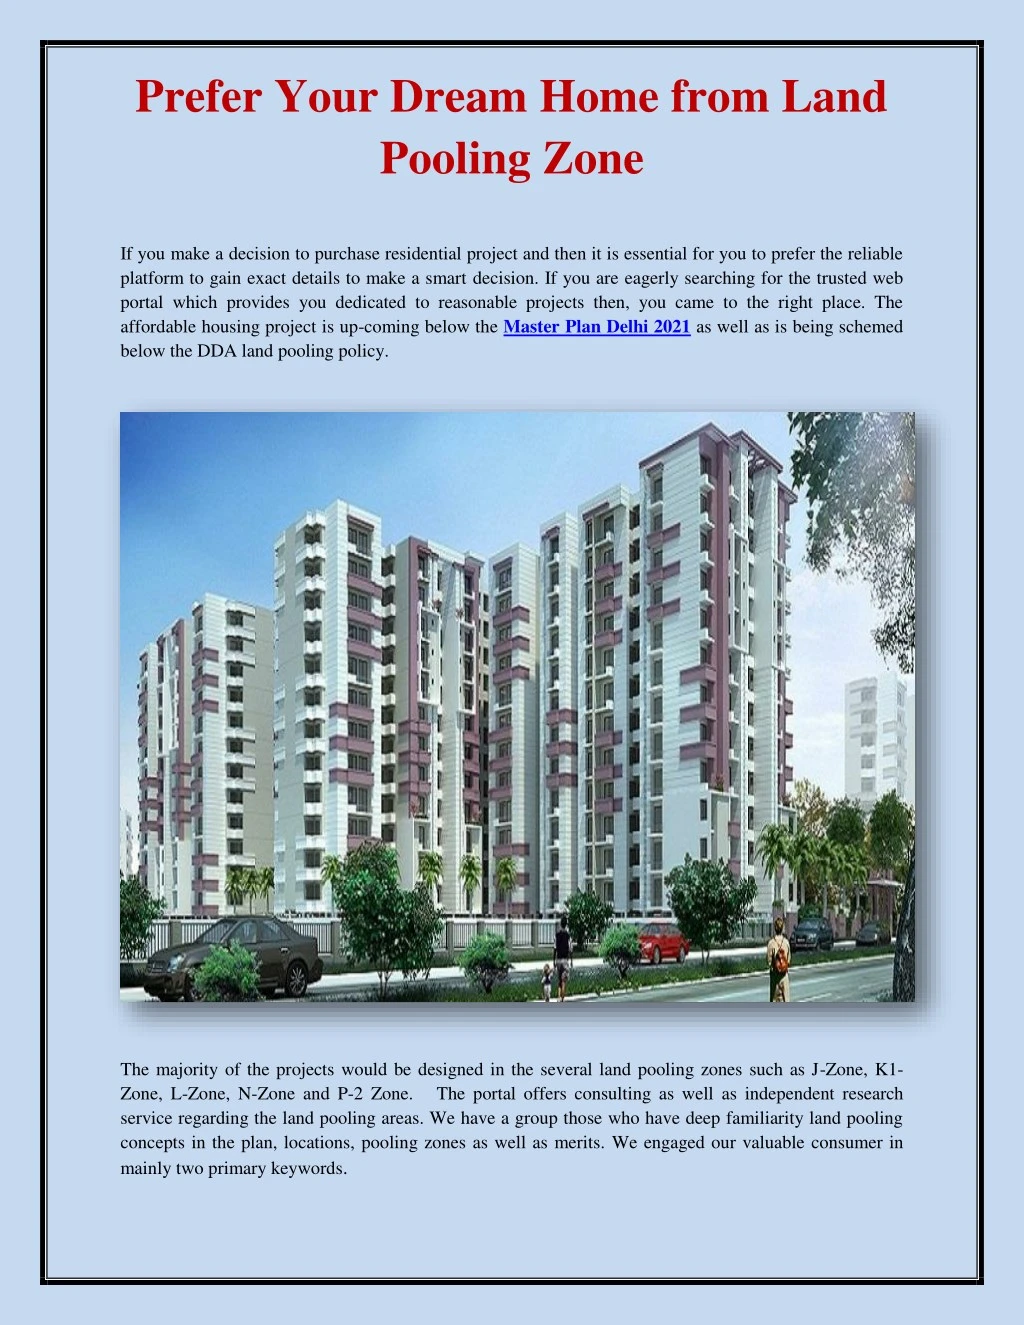 prefer your dream home from land pooling zone